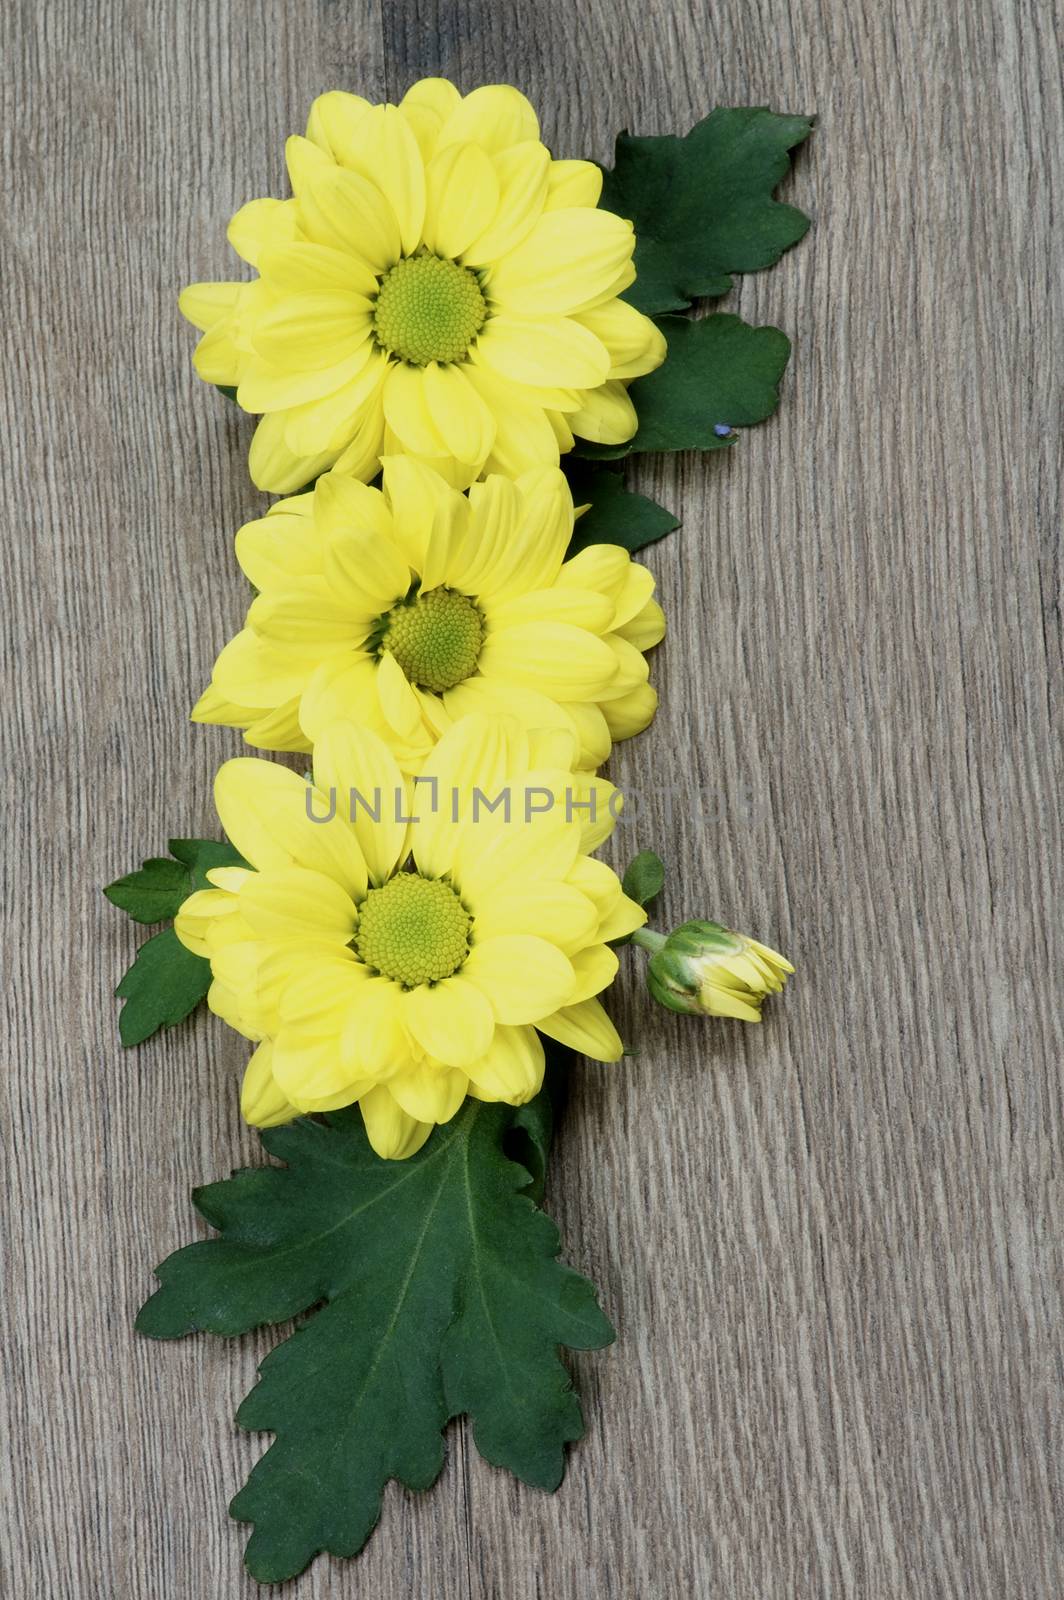 Three Yellow Chrysanthemum with Leafs In a Row closeup on Textured Wooden background